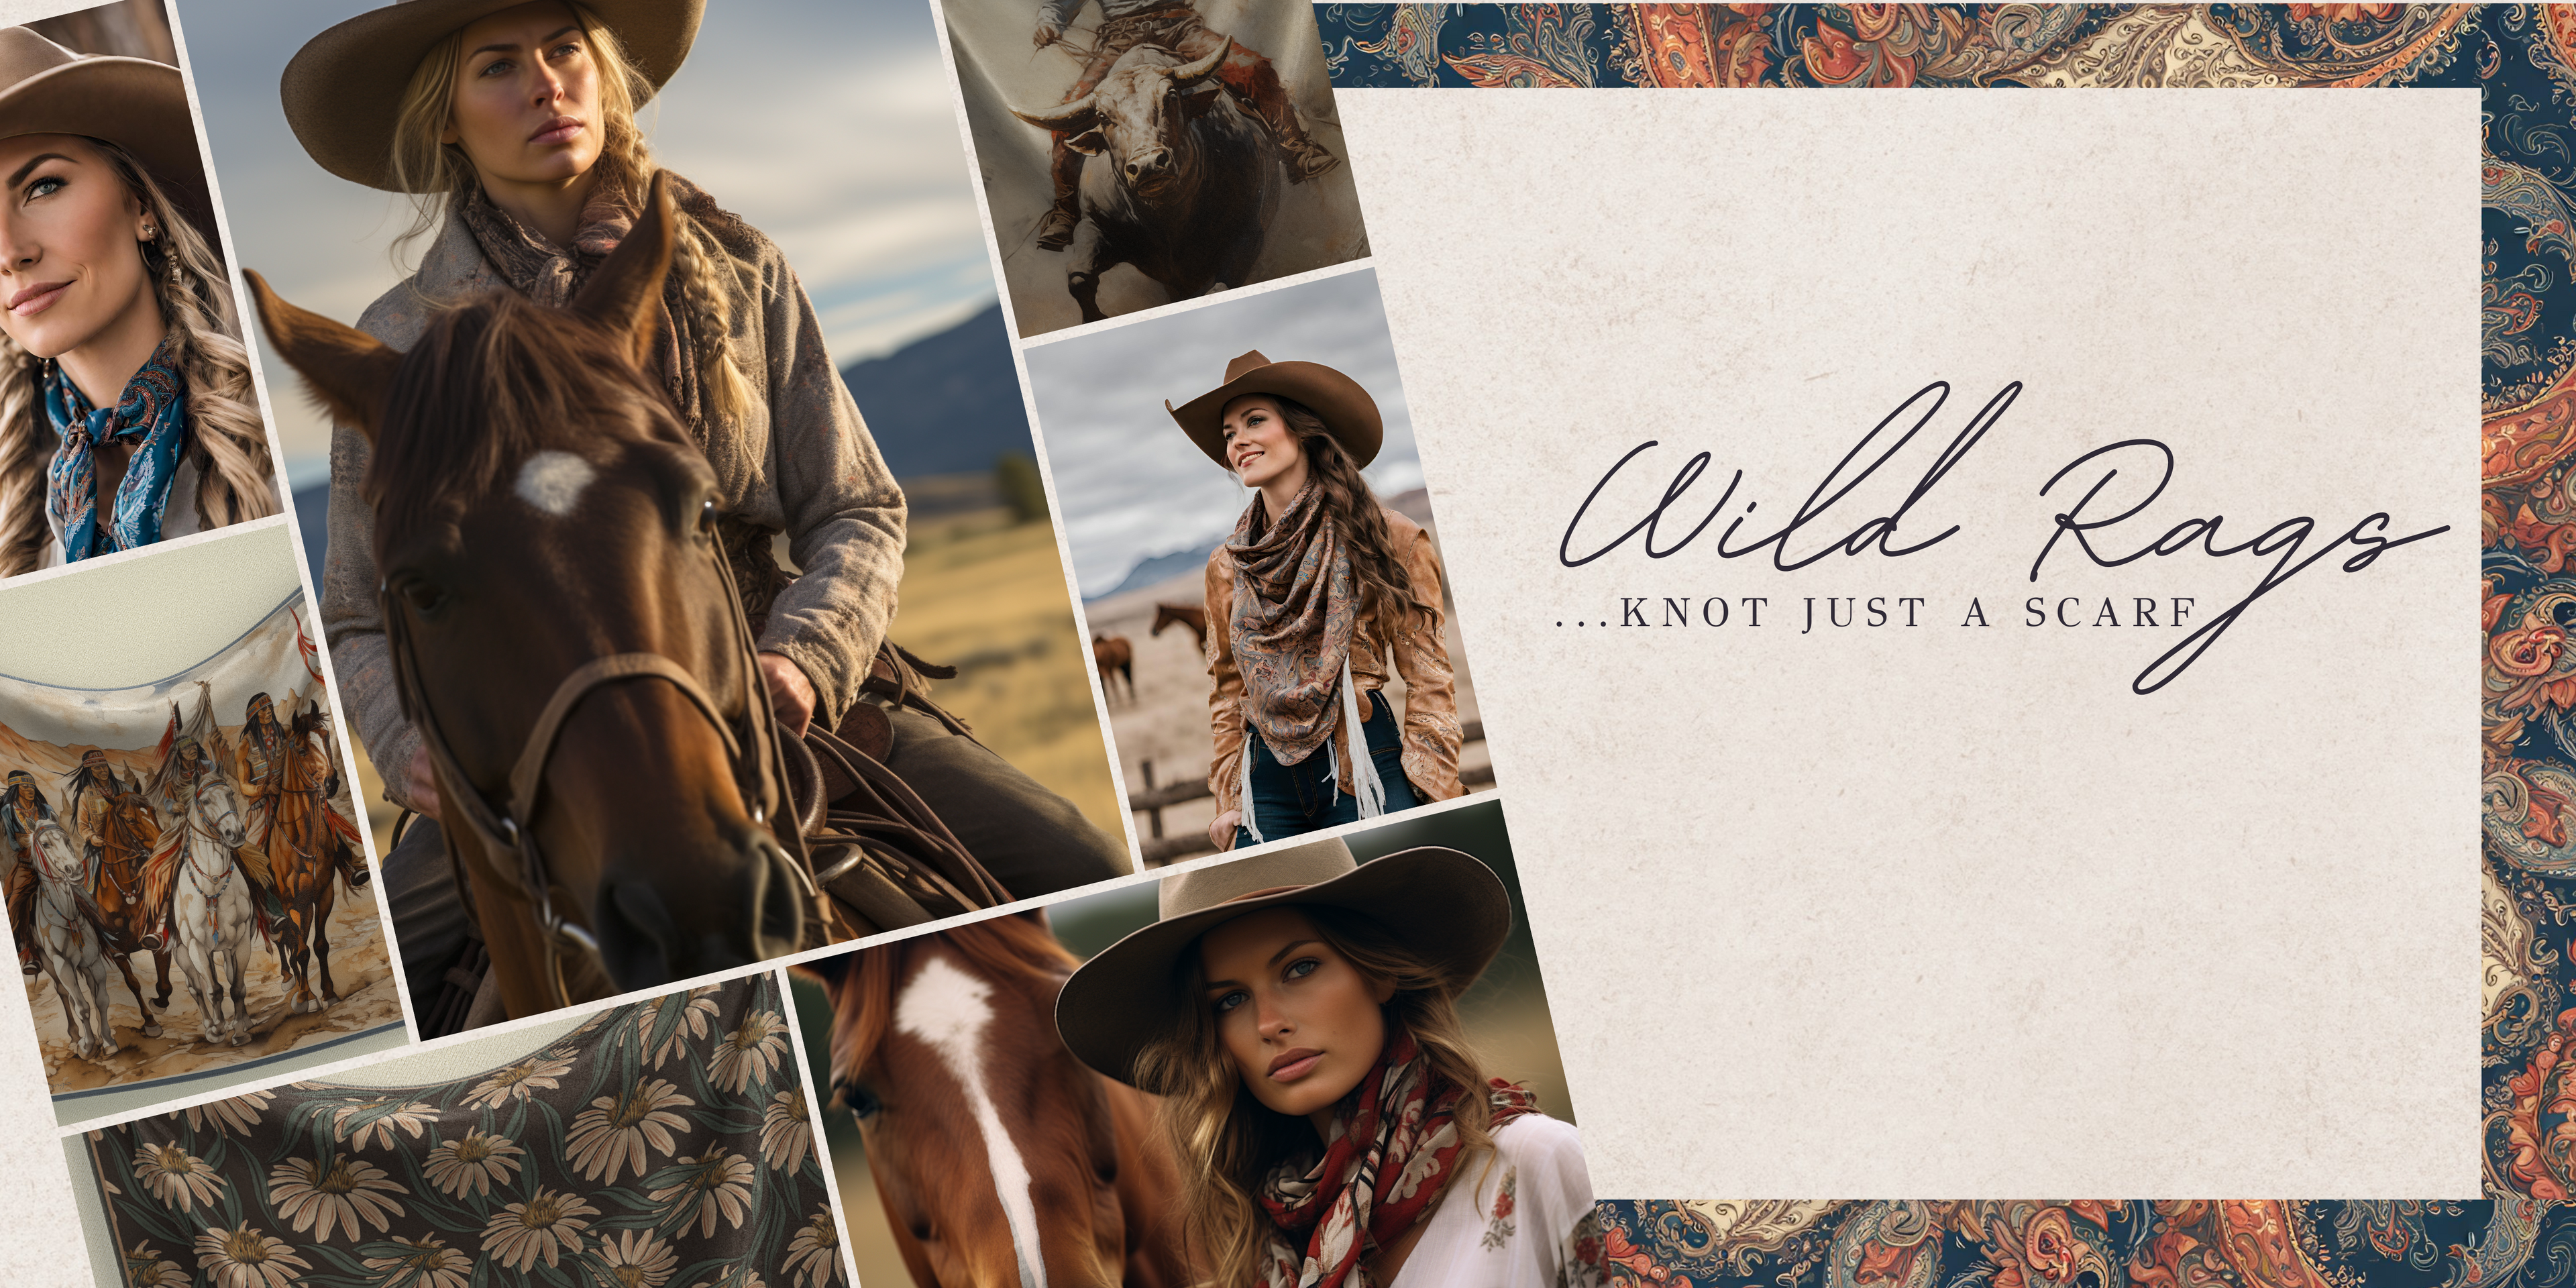 Unique Wild rags: New In-Stock Wild Rags Collection - Perfect Gifts for Horse Lovers, Western Silk Scarves, and More at Eliza Singer. Explore the Art of Western Fashion. #ElizaSinger #WildRags #GiftsForHorseLovers 